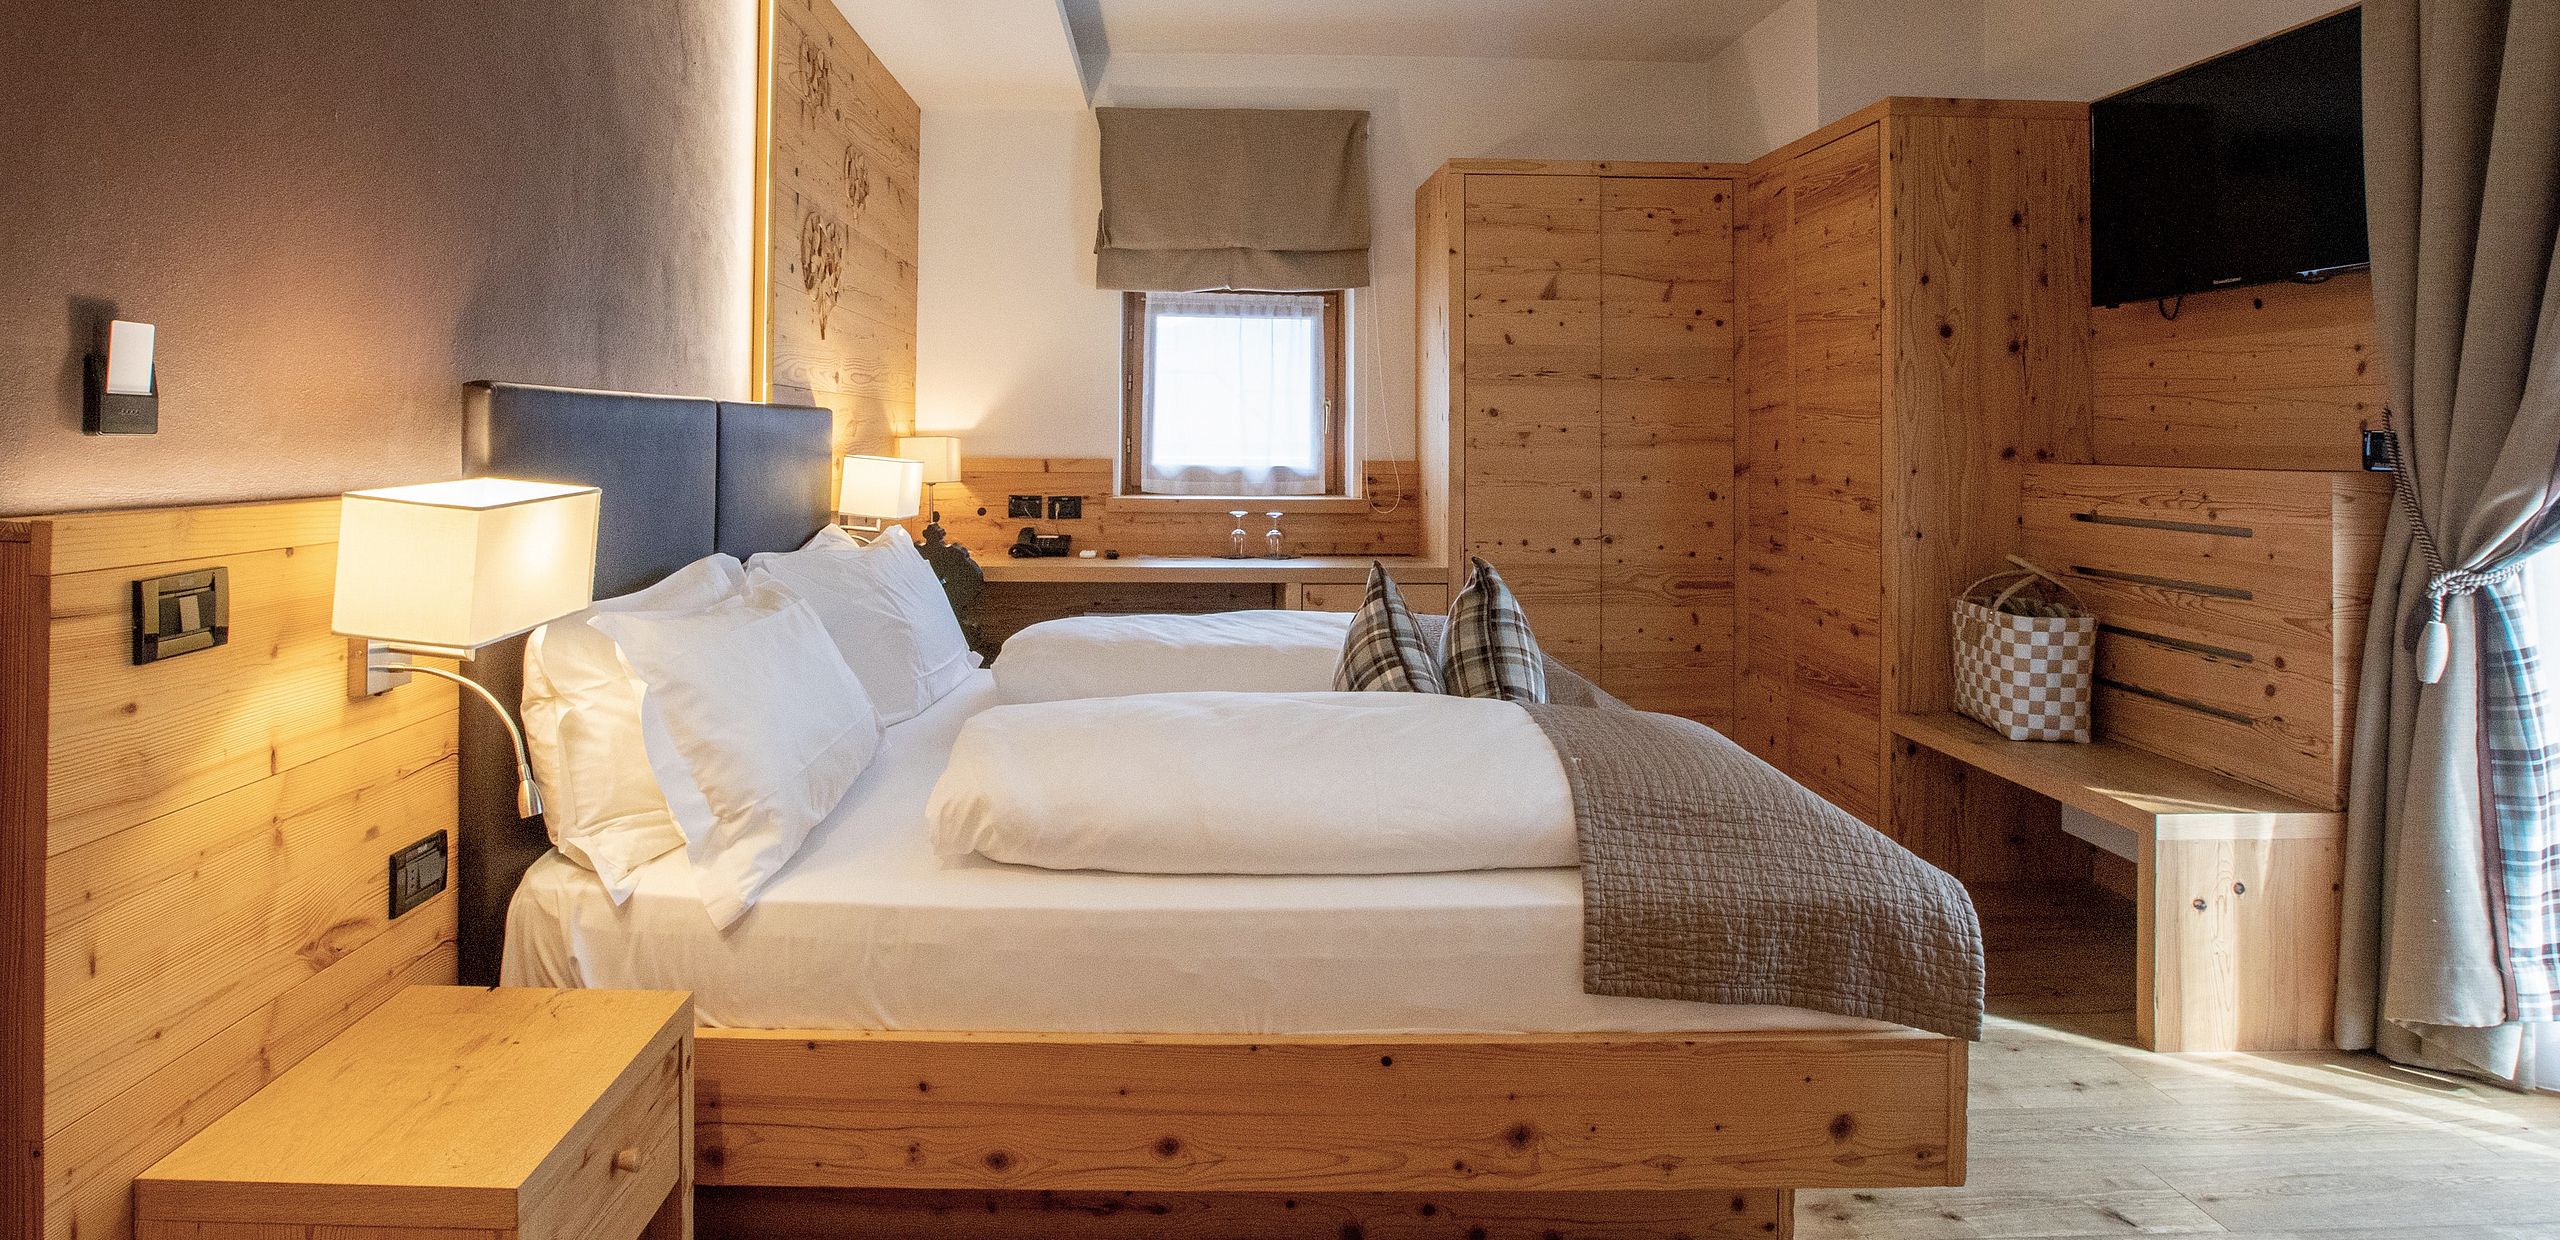 Rooms, suites & lodges - your mountain getaway Trentino